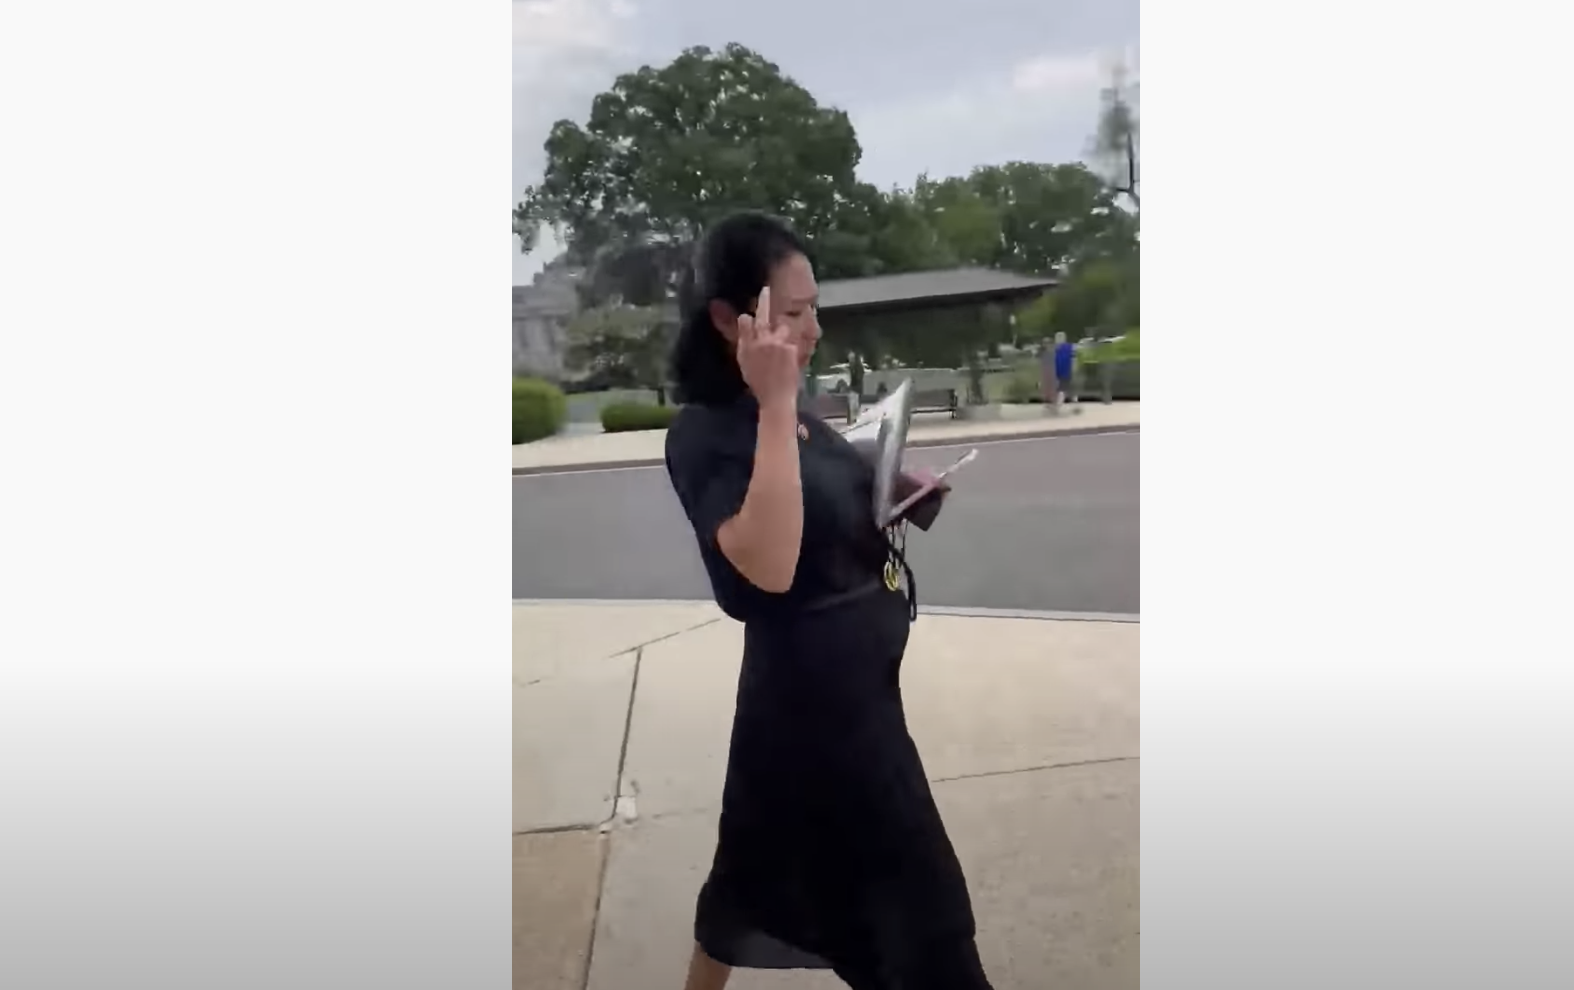 [GRAPHIC VIDEO] Stephanie Murphy Called To Resign After Making Offensive Gesture